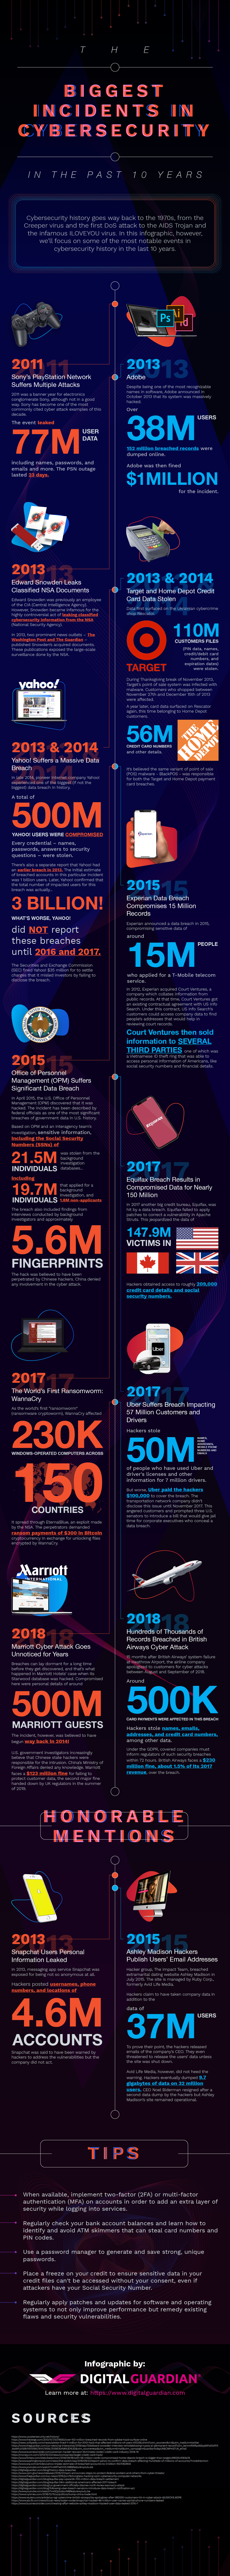 The Biggest Incidents in Cybersecurity (in the Past 10 Years)